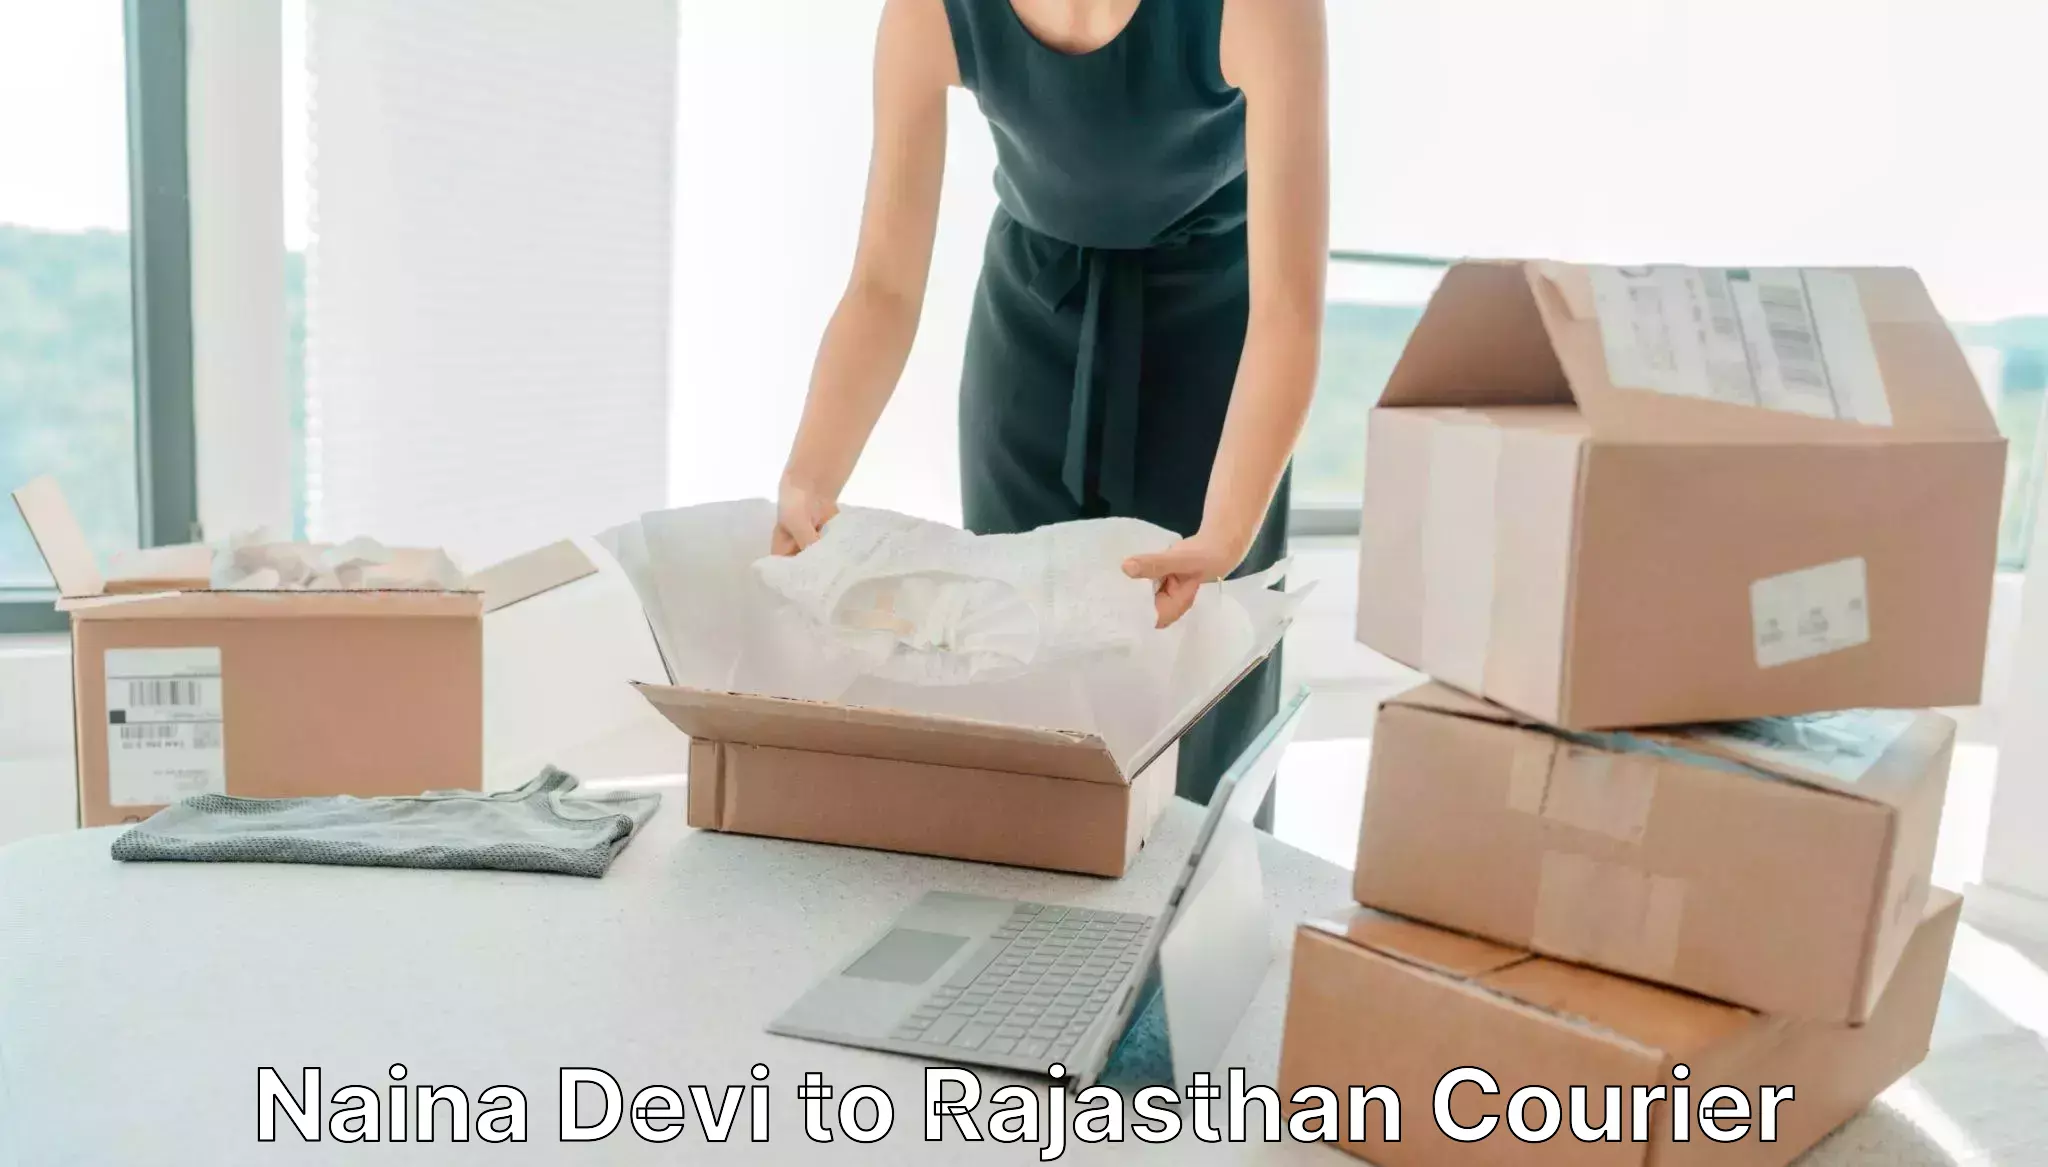 24-hour courier services Naina Devi to Merta